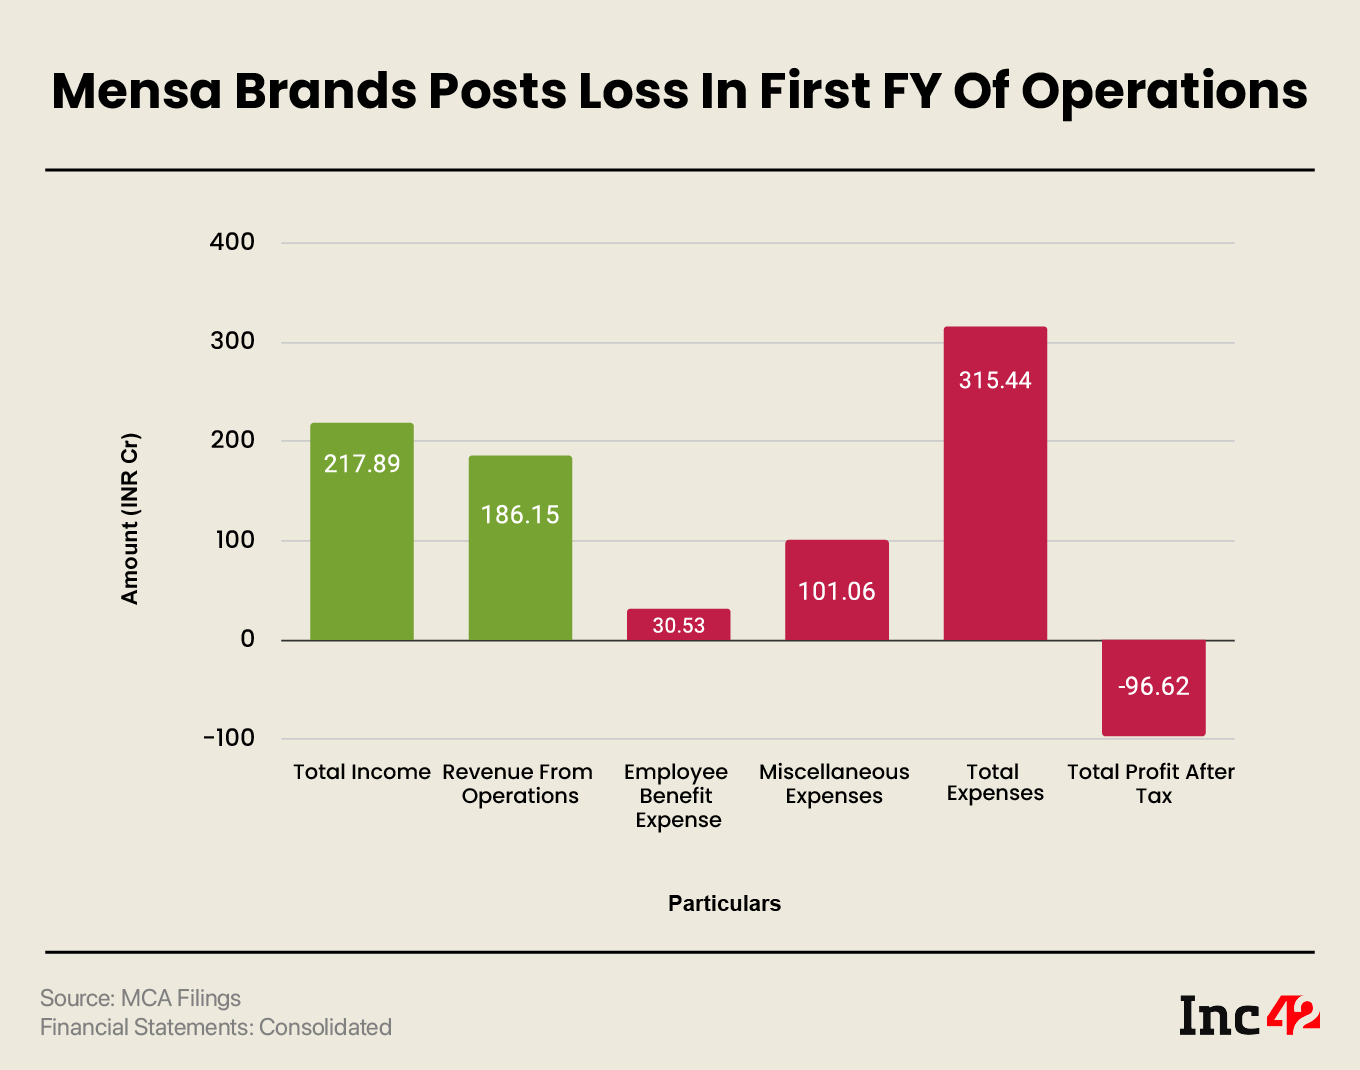 Mensa Brands posts loss of INR 96.62 Cr in FY22